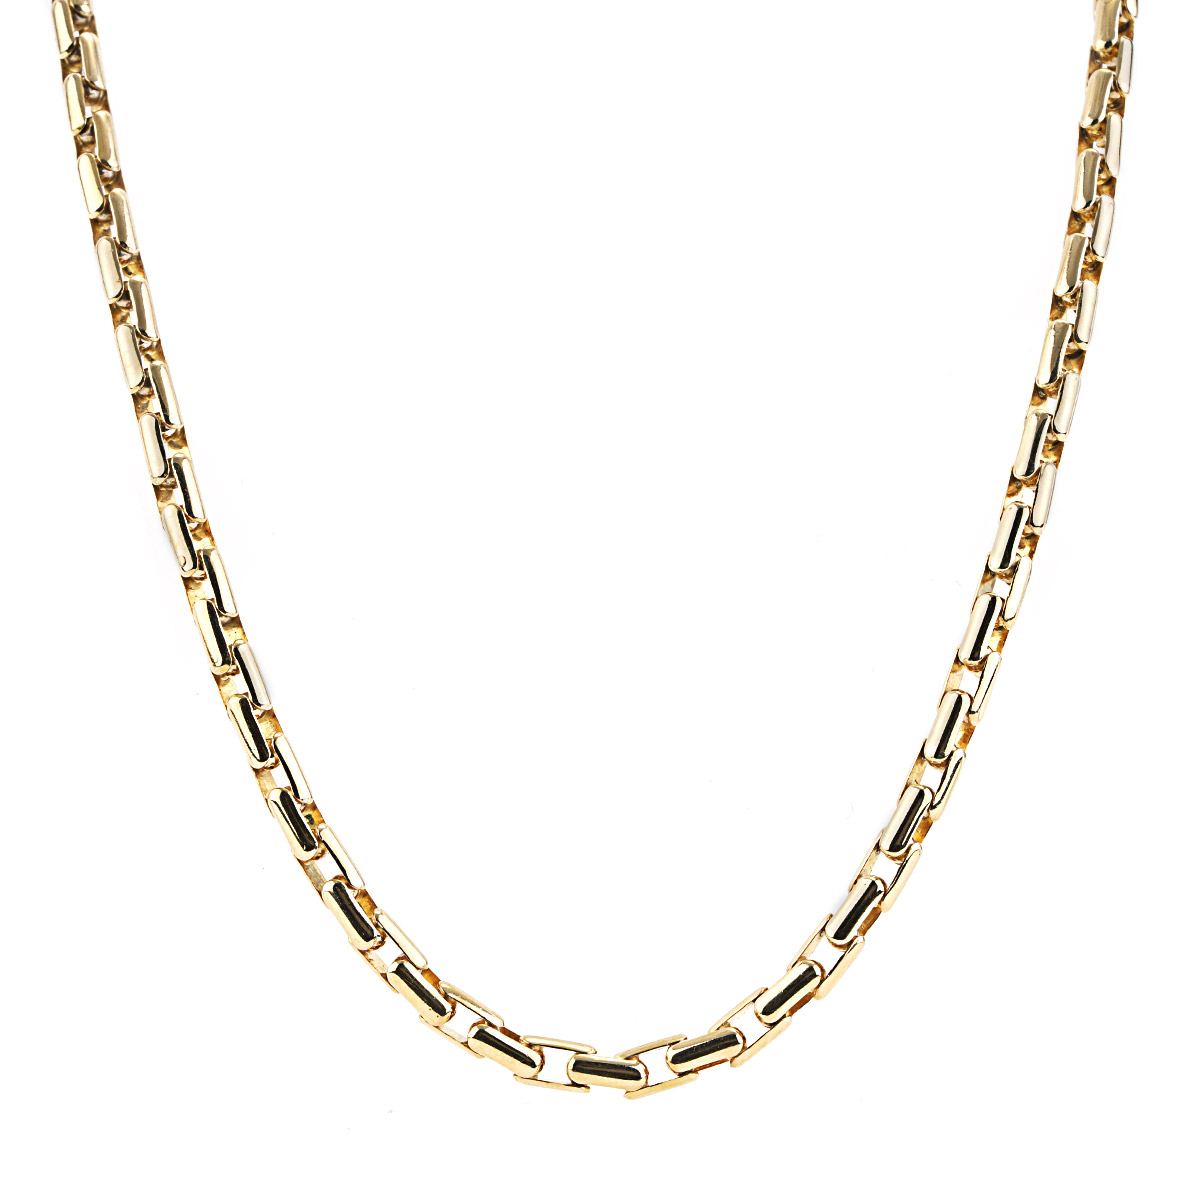 Baraka Brev 18K Yellow Gold Link Chain Necklace 20in.